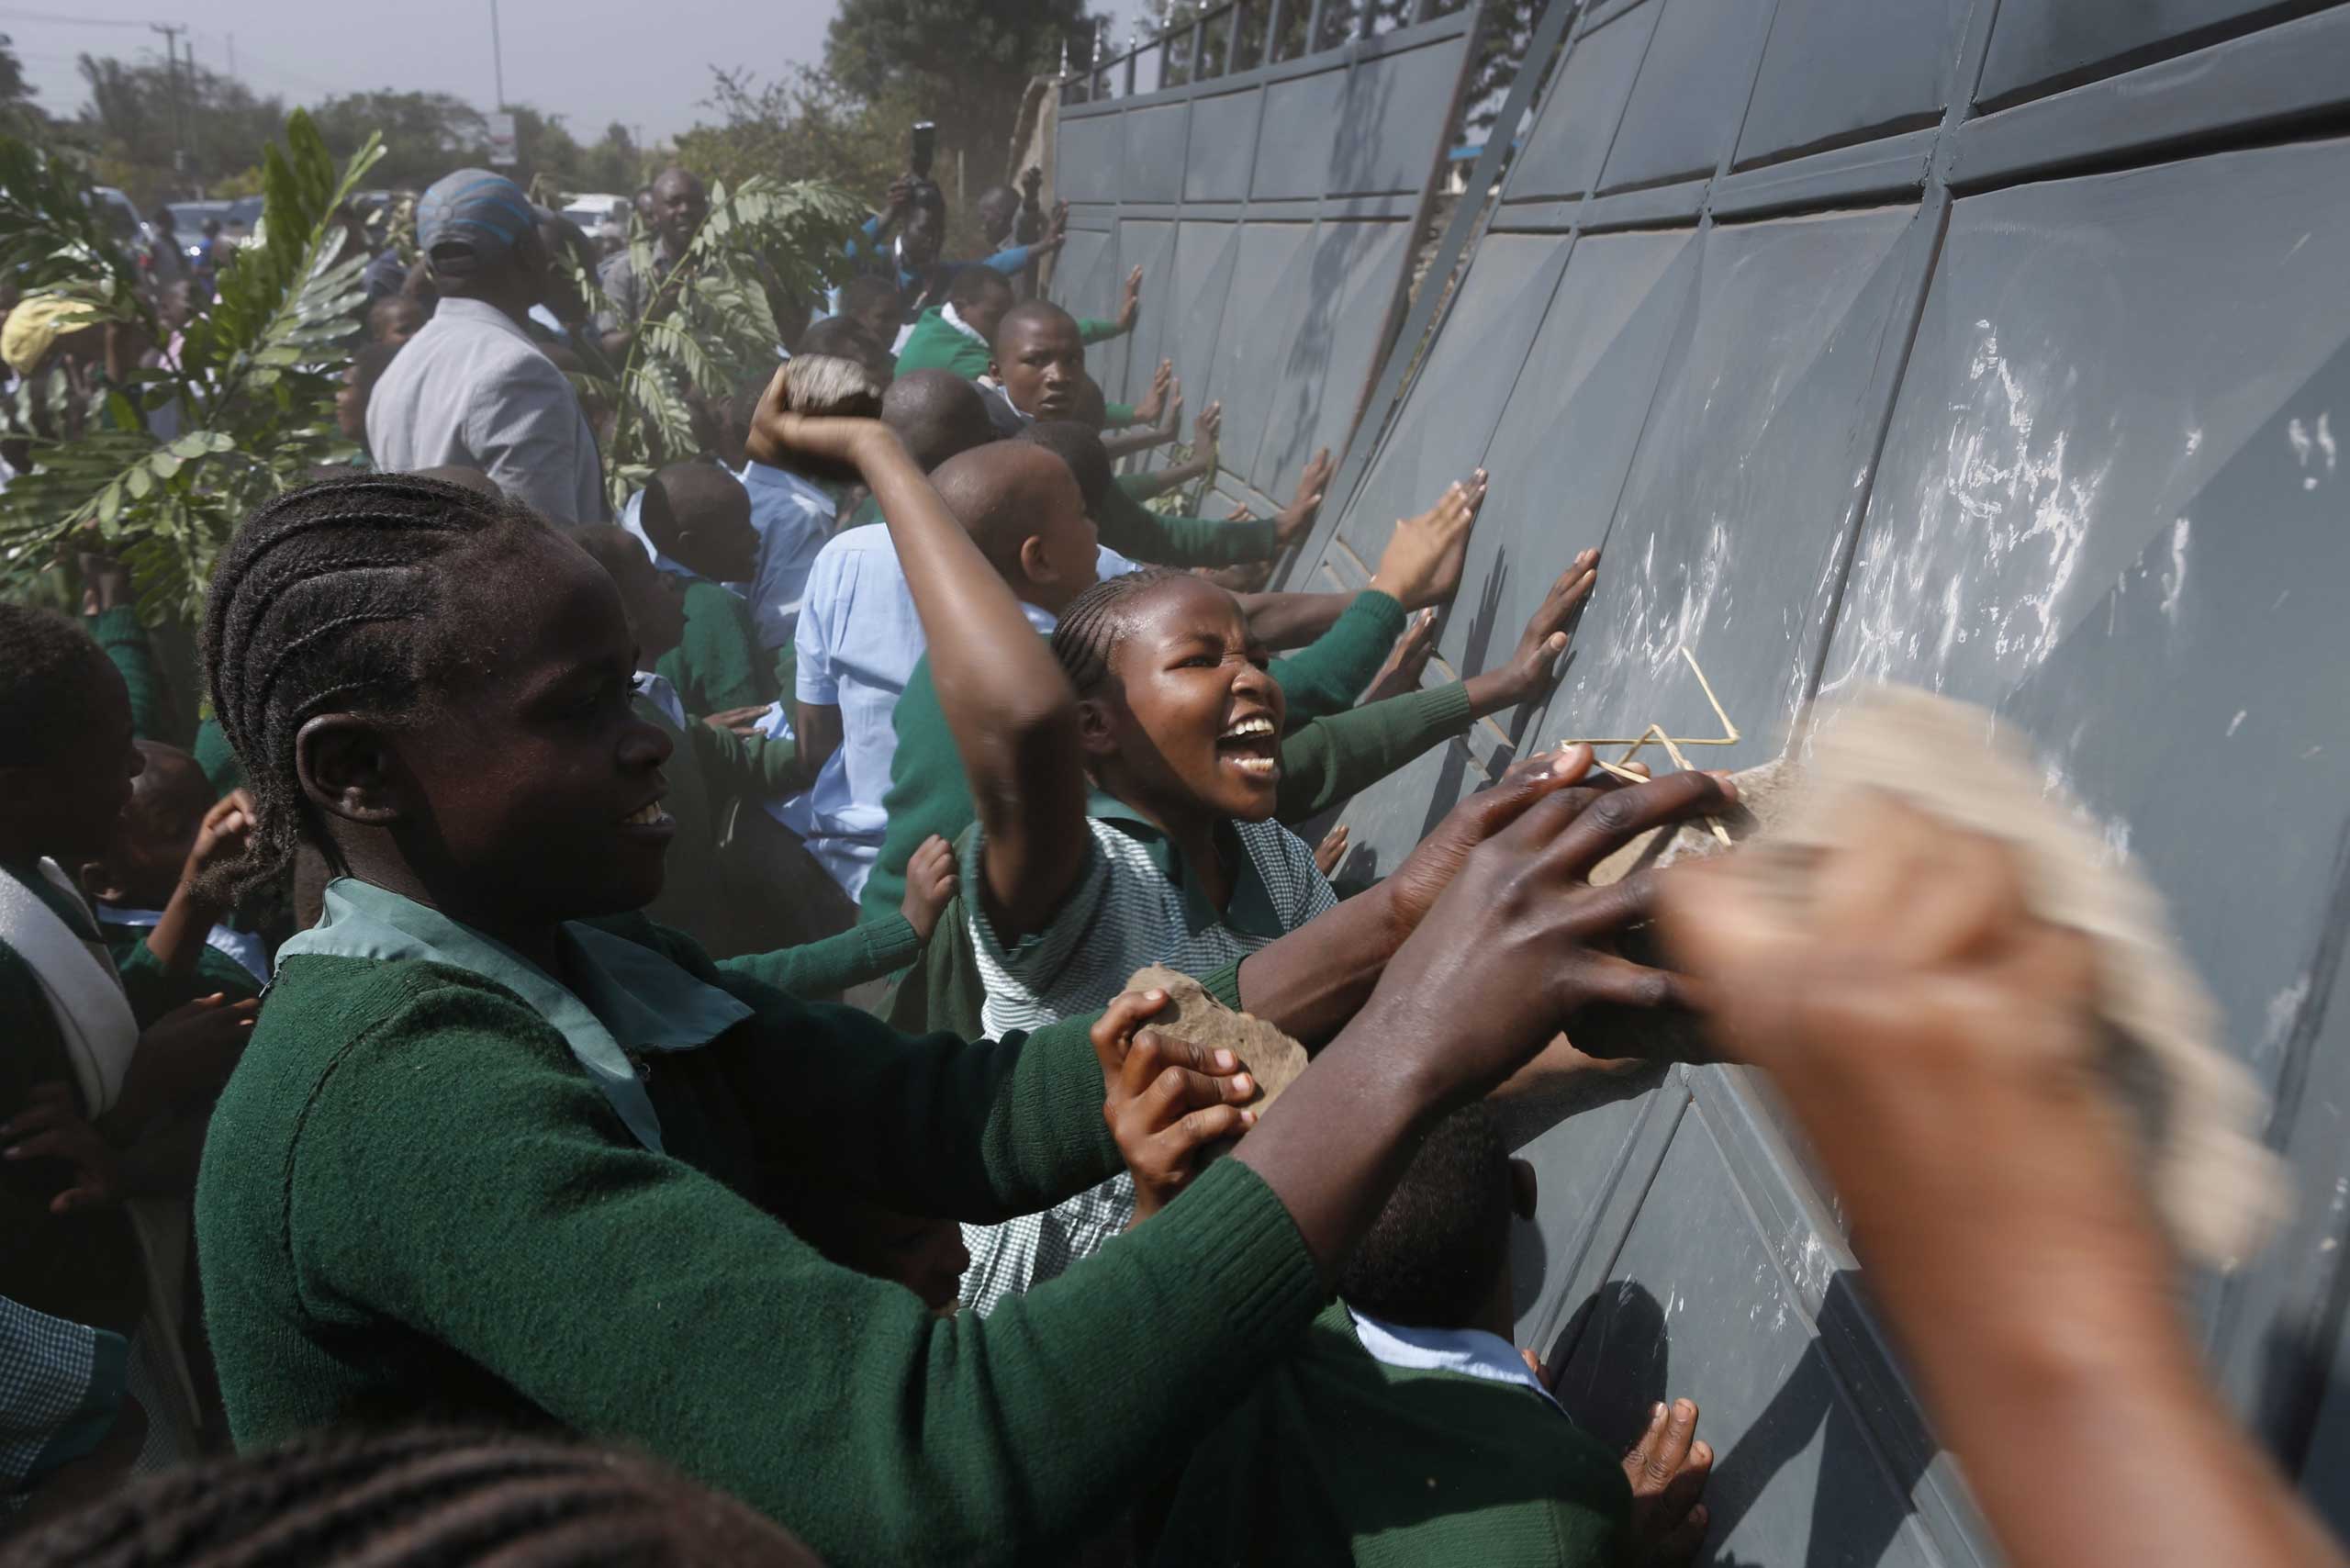 Jan. 19, 2015. School children push the fence to enter the school playground during a protest against alleged land grabbing at Langata Road Primary School in Nairobi, Kenya. At least 5 pupils have been rushed to the hospital after police fired teargas canisters at them and activists.